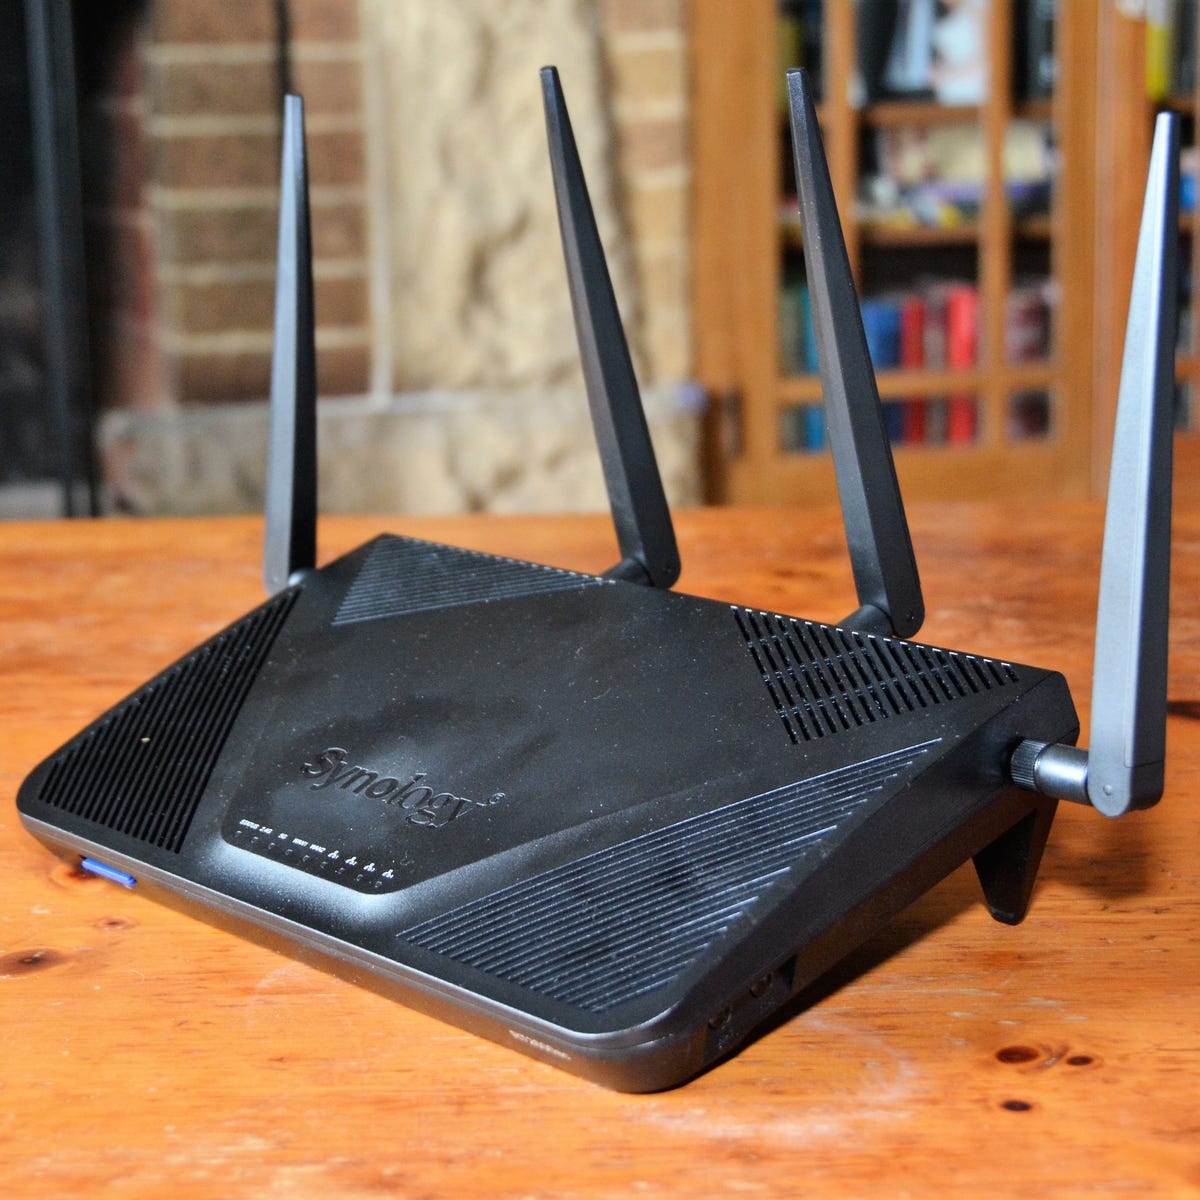 Sluit een verzekering af ontmoeten Westers Synology RT2600ac review: The best router any savvy user could ask for -  CNET